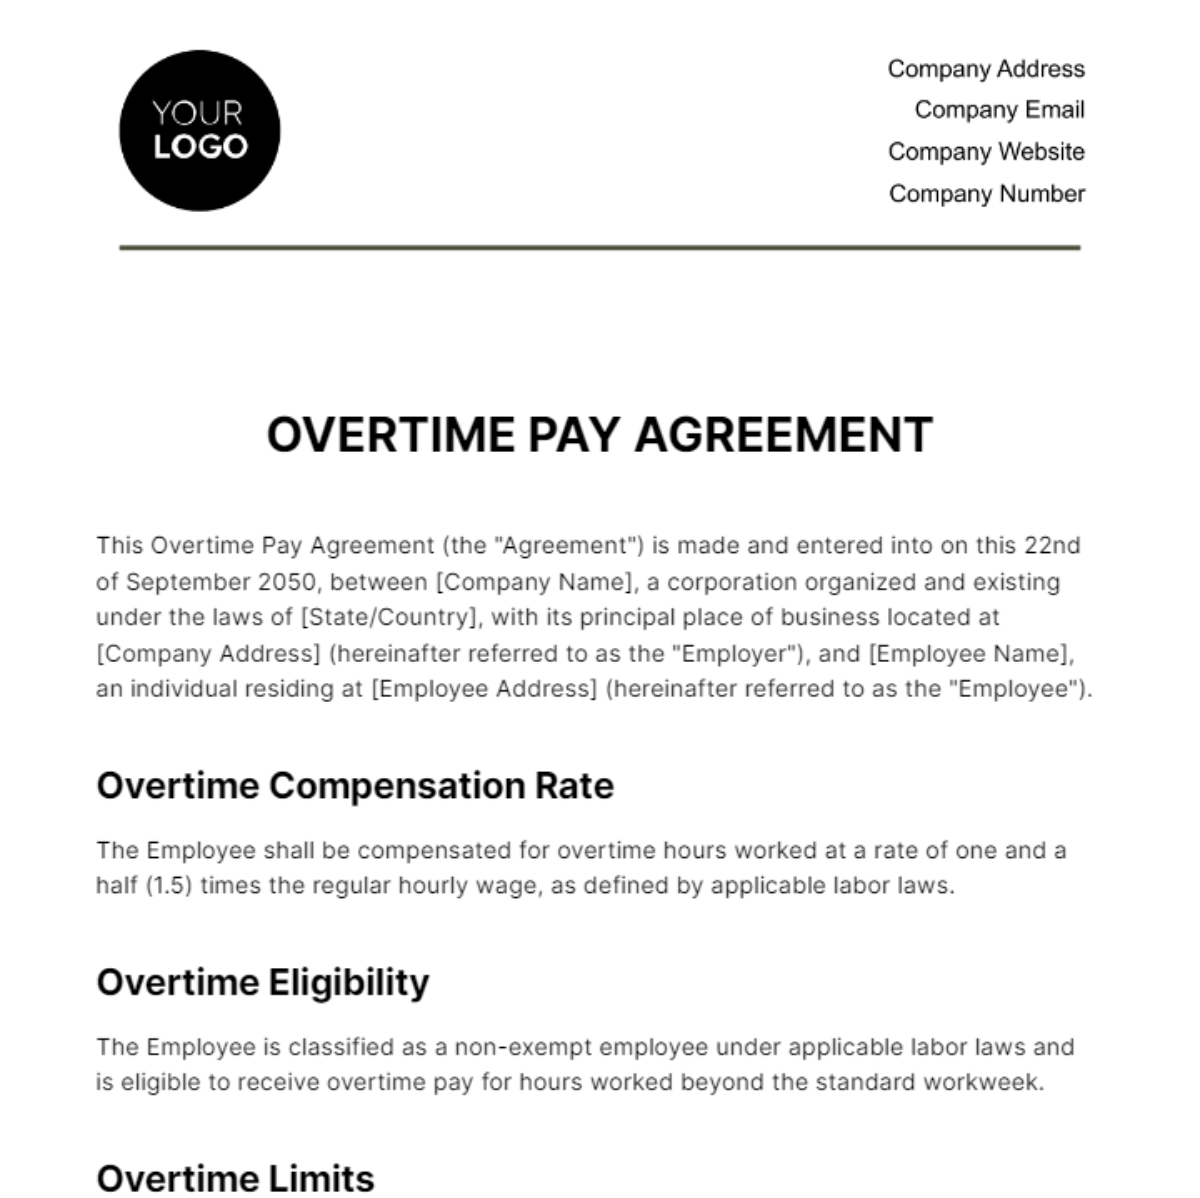 Overtime Pay Agreement HR Template